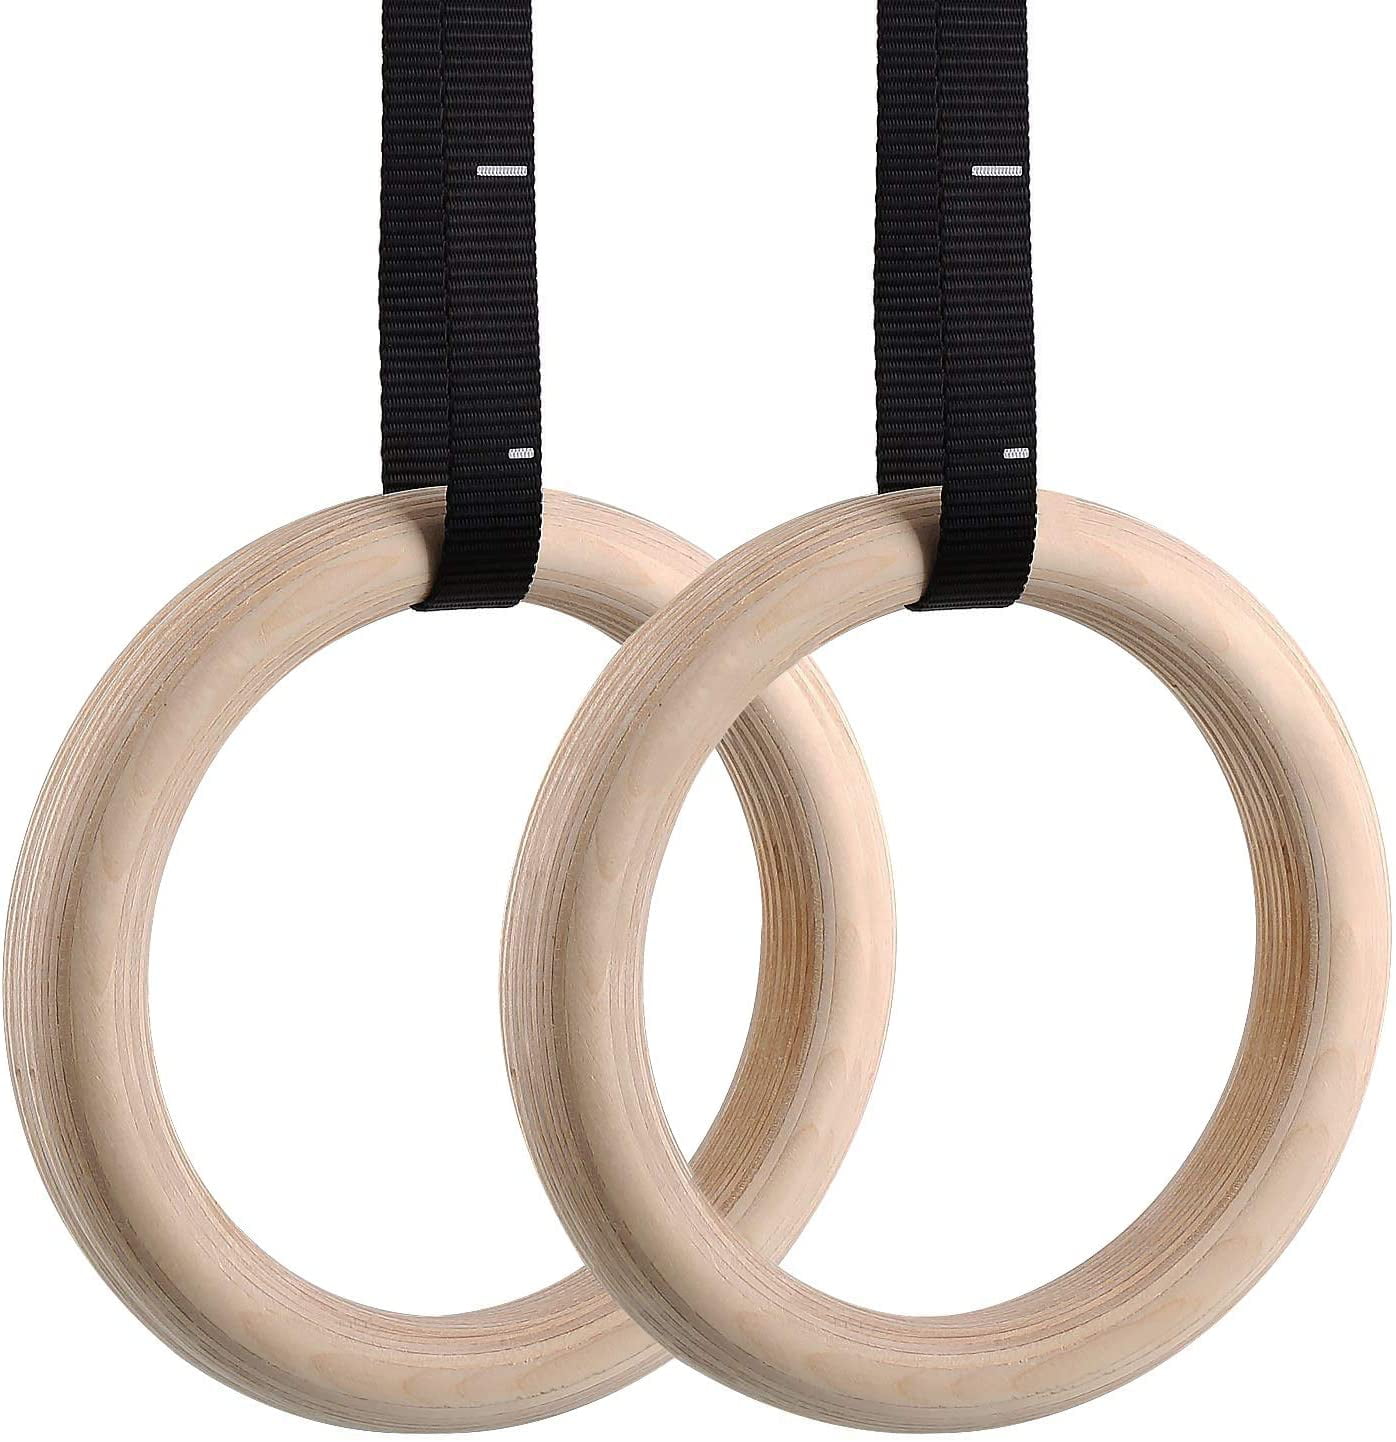 Gymnastic Ring Strength Training Wood Fitness Exercise Ring Adjustable  R5T7 